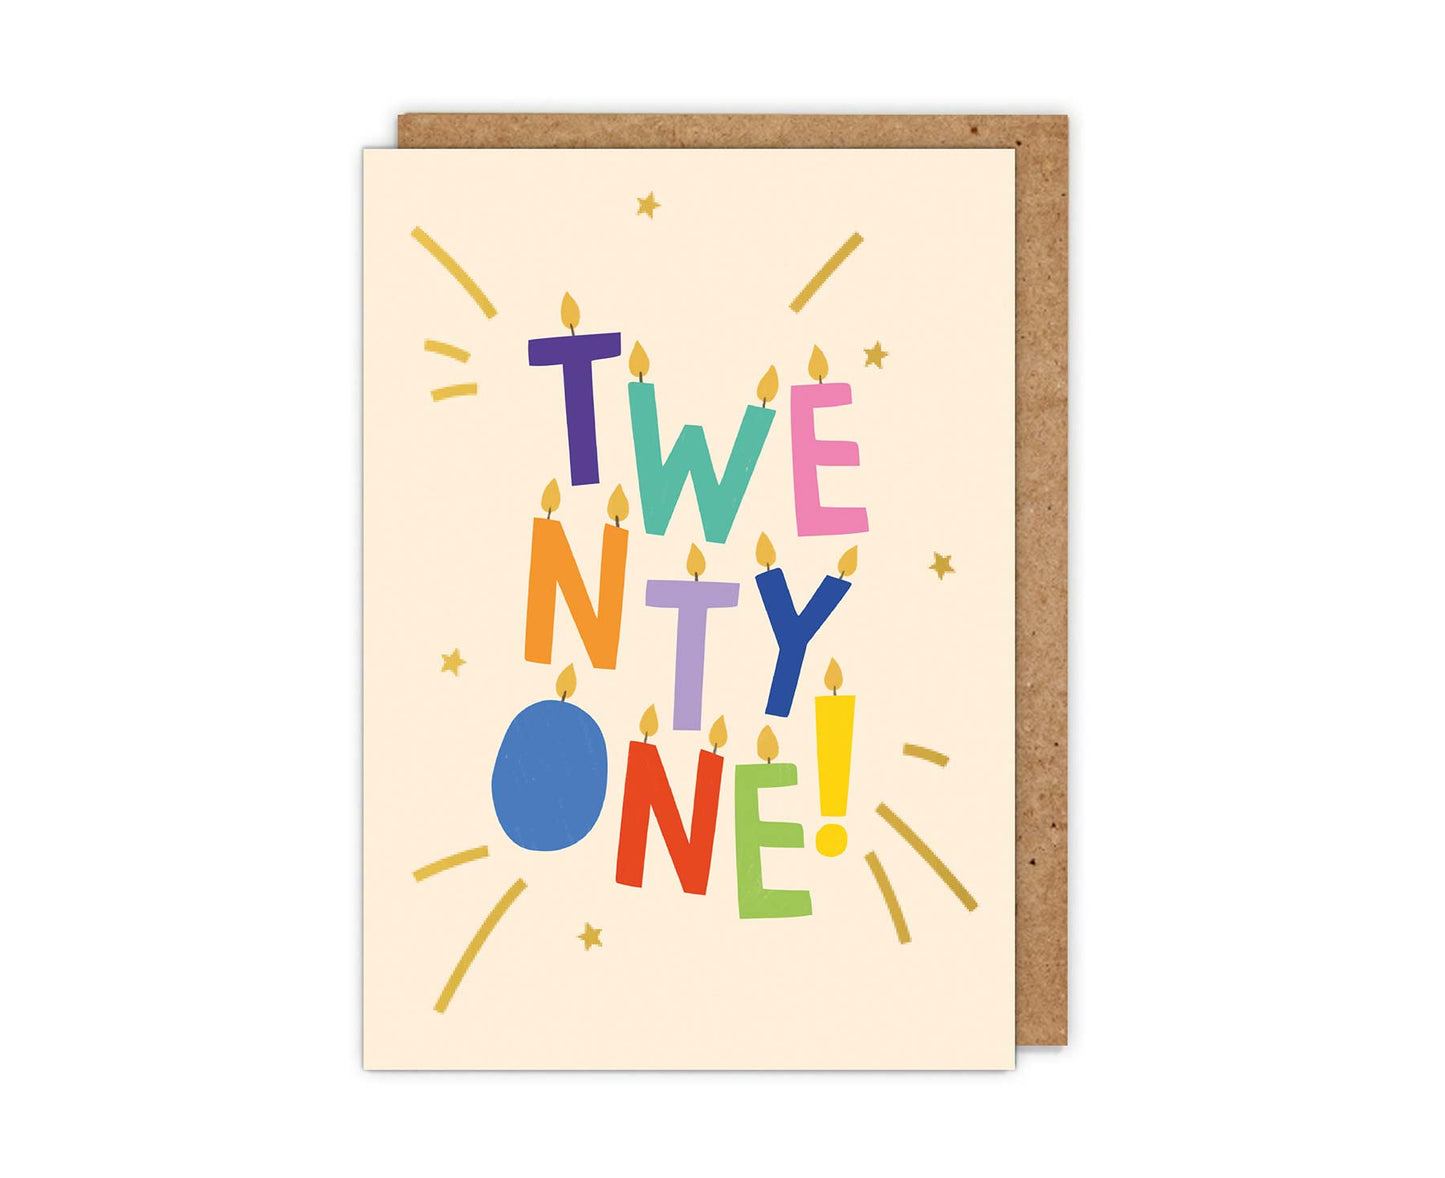 Gold Foiled Twenty One! Letter Candles Birthday Card